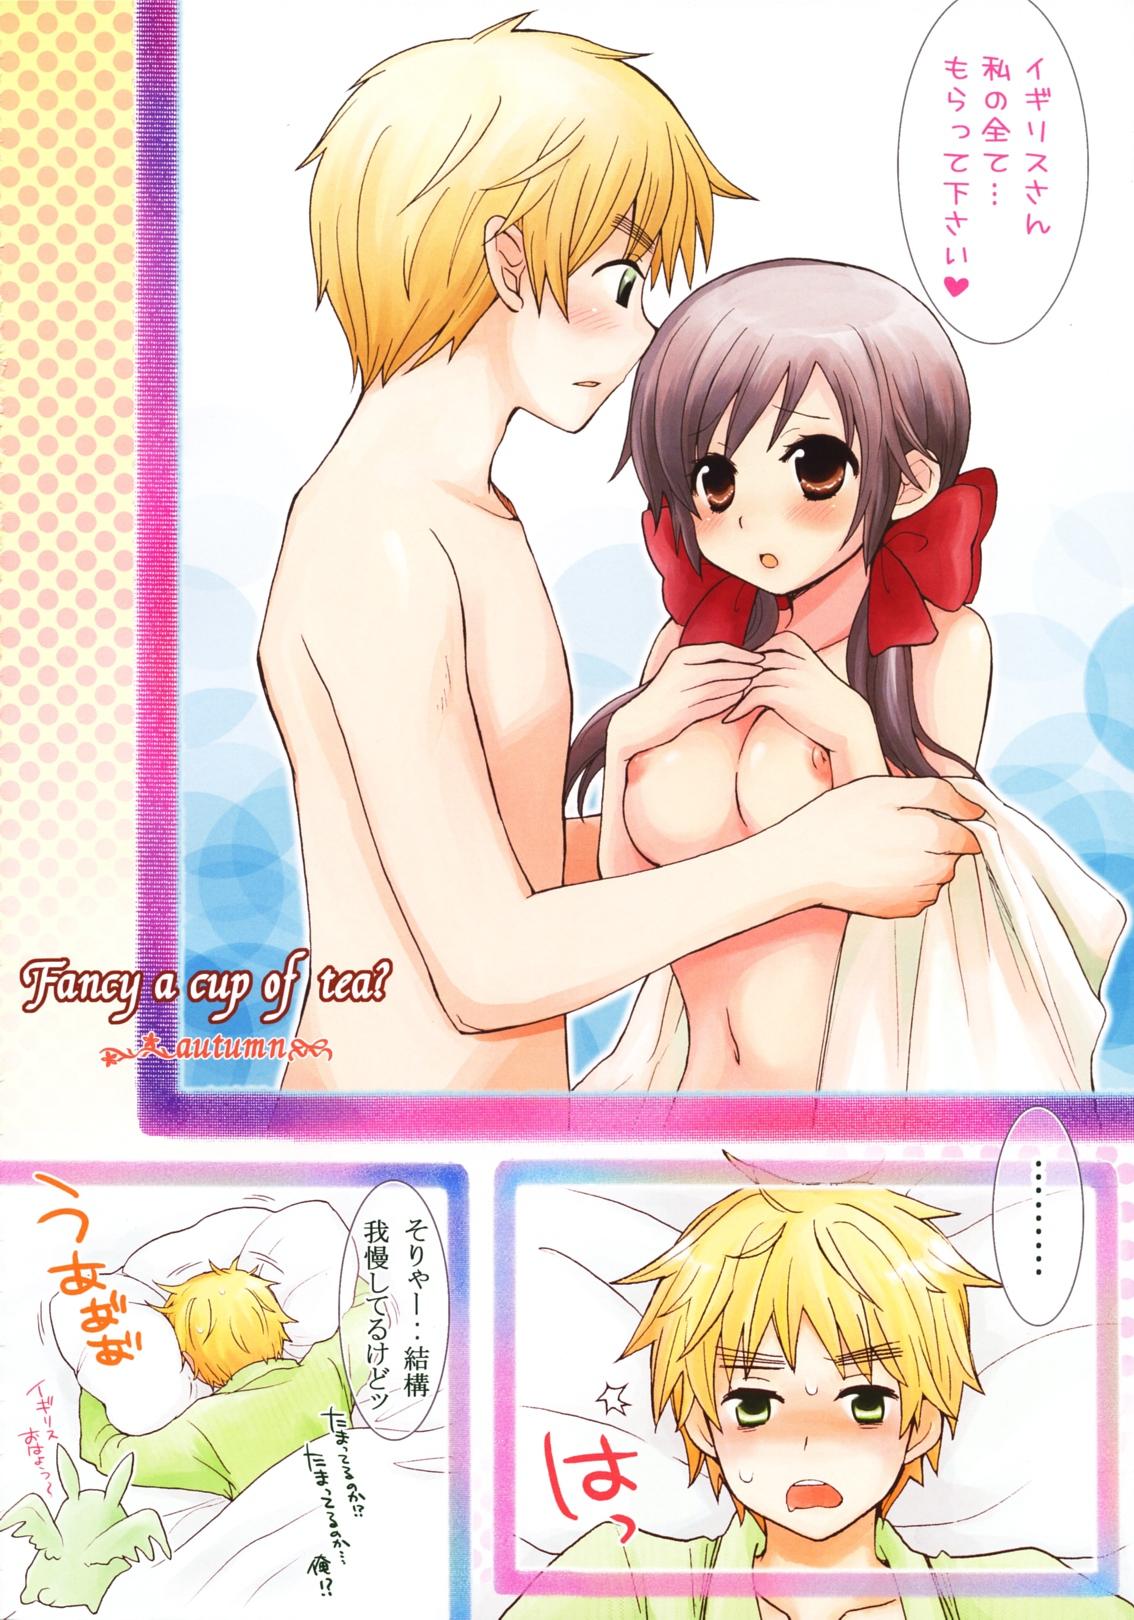 Behind Fancy a cup of tea？ - Axis powers hetalia Solo Female - Page 3